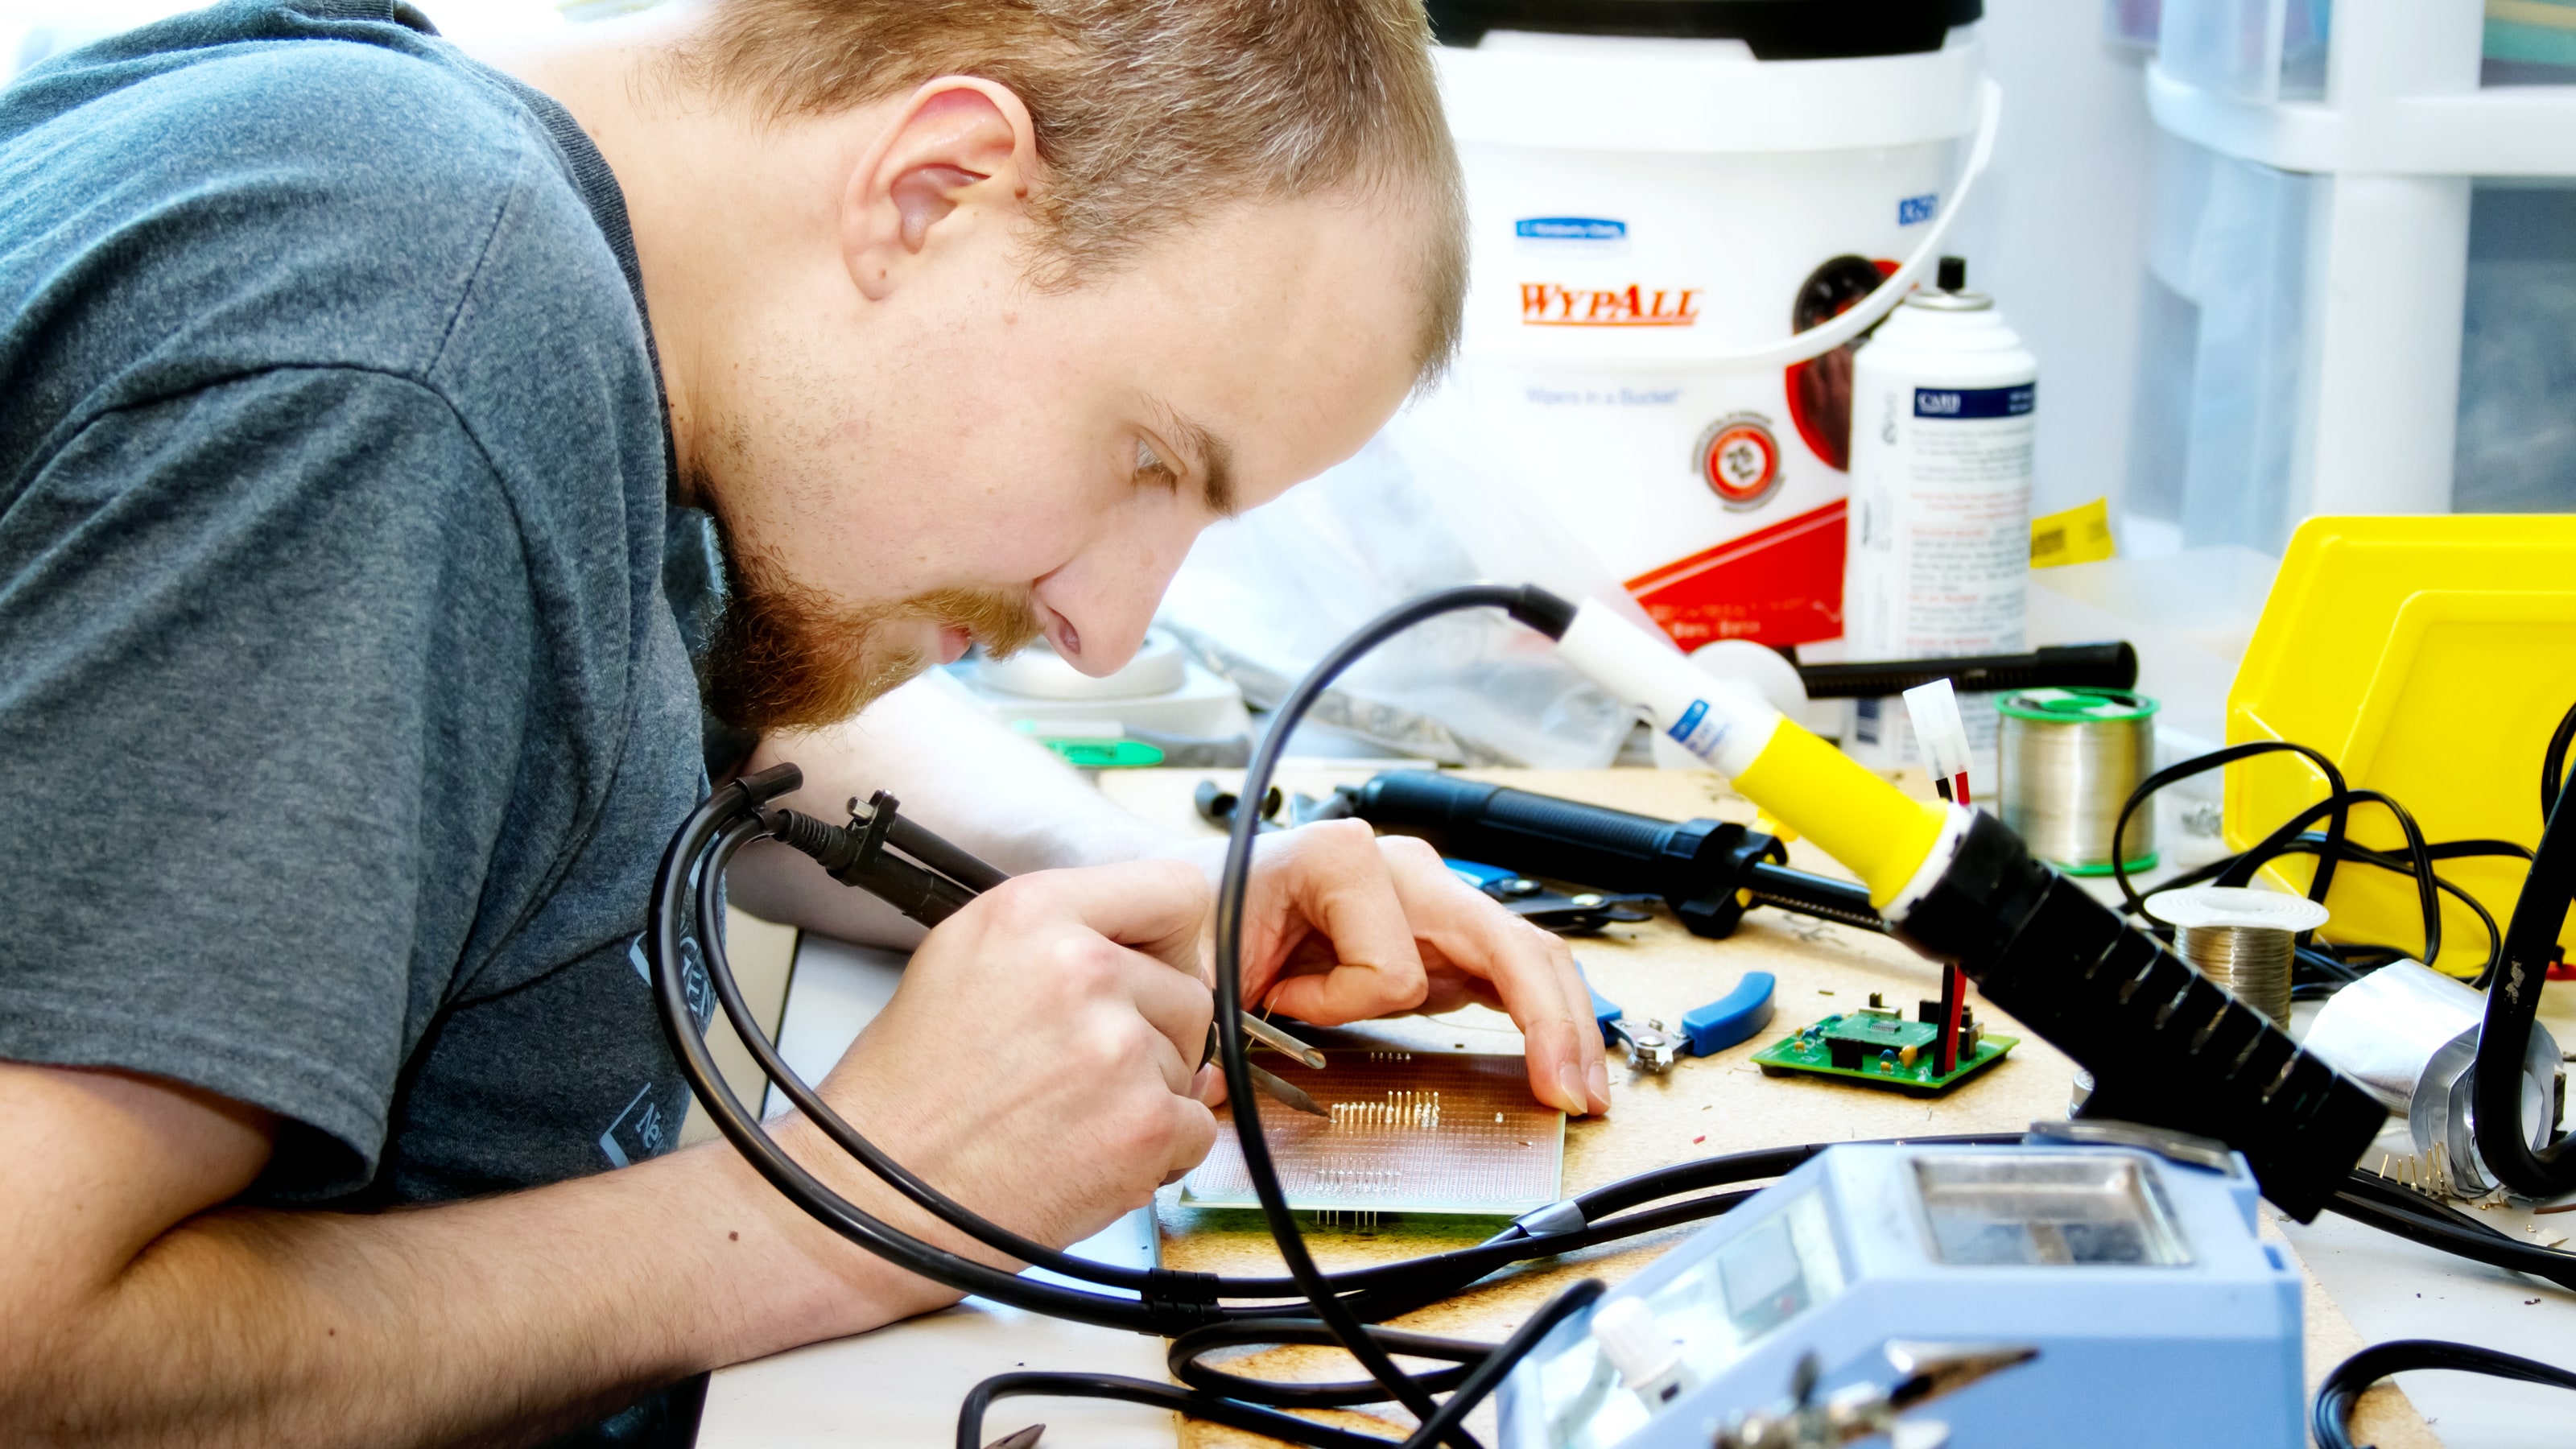 A student solders a circuit board on a desk cluttered with tools.